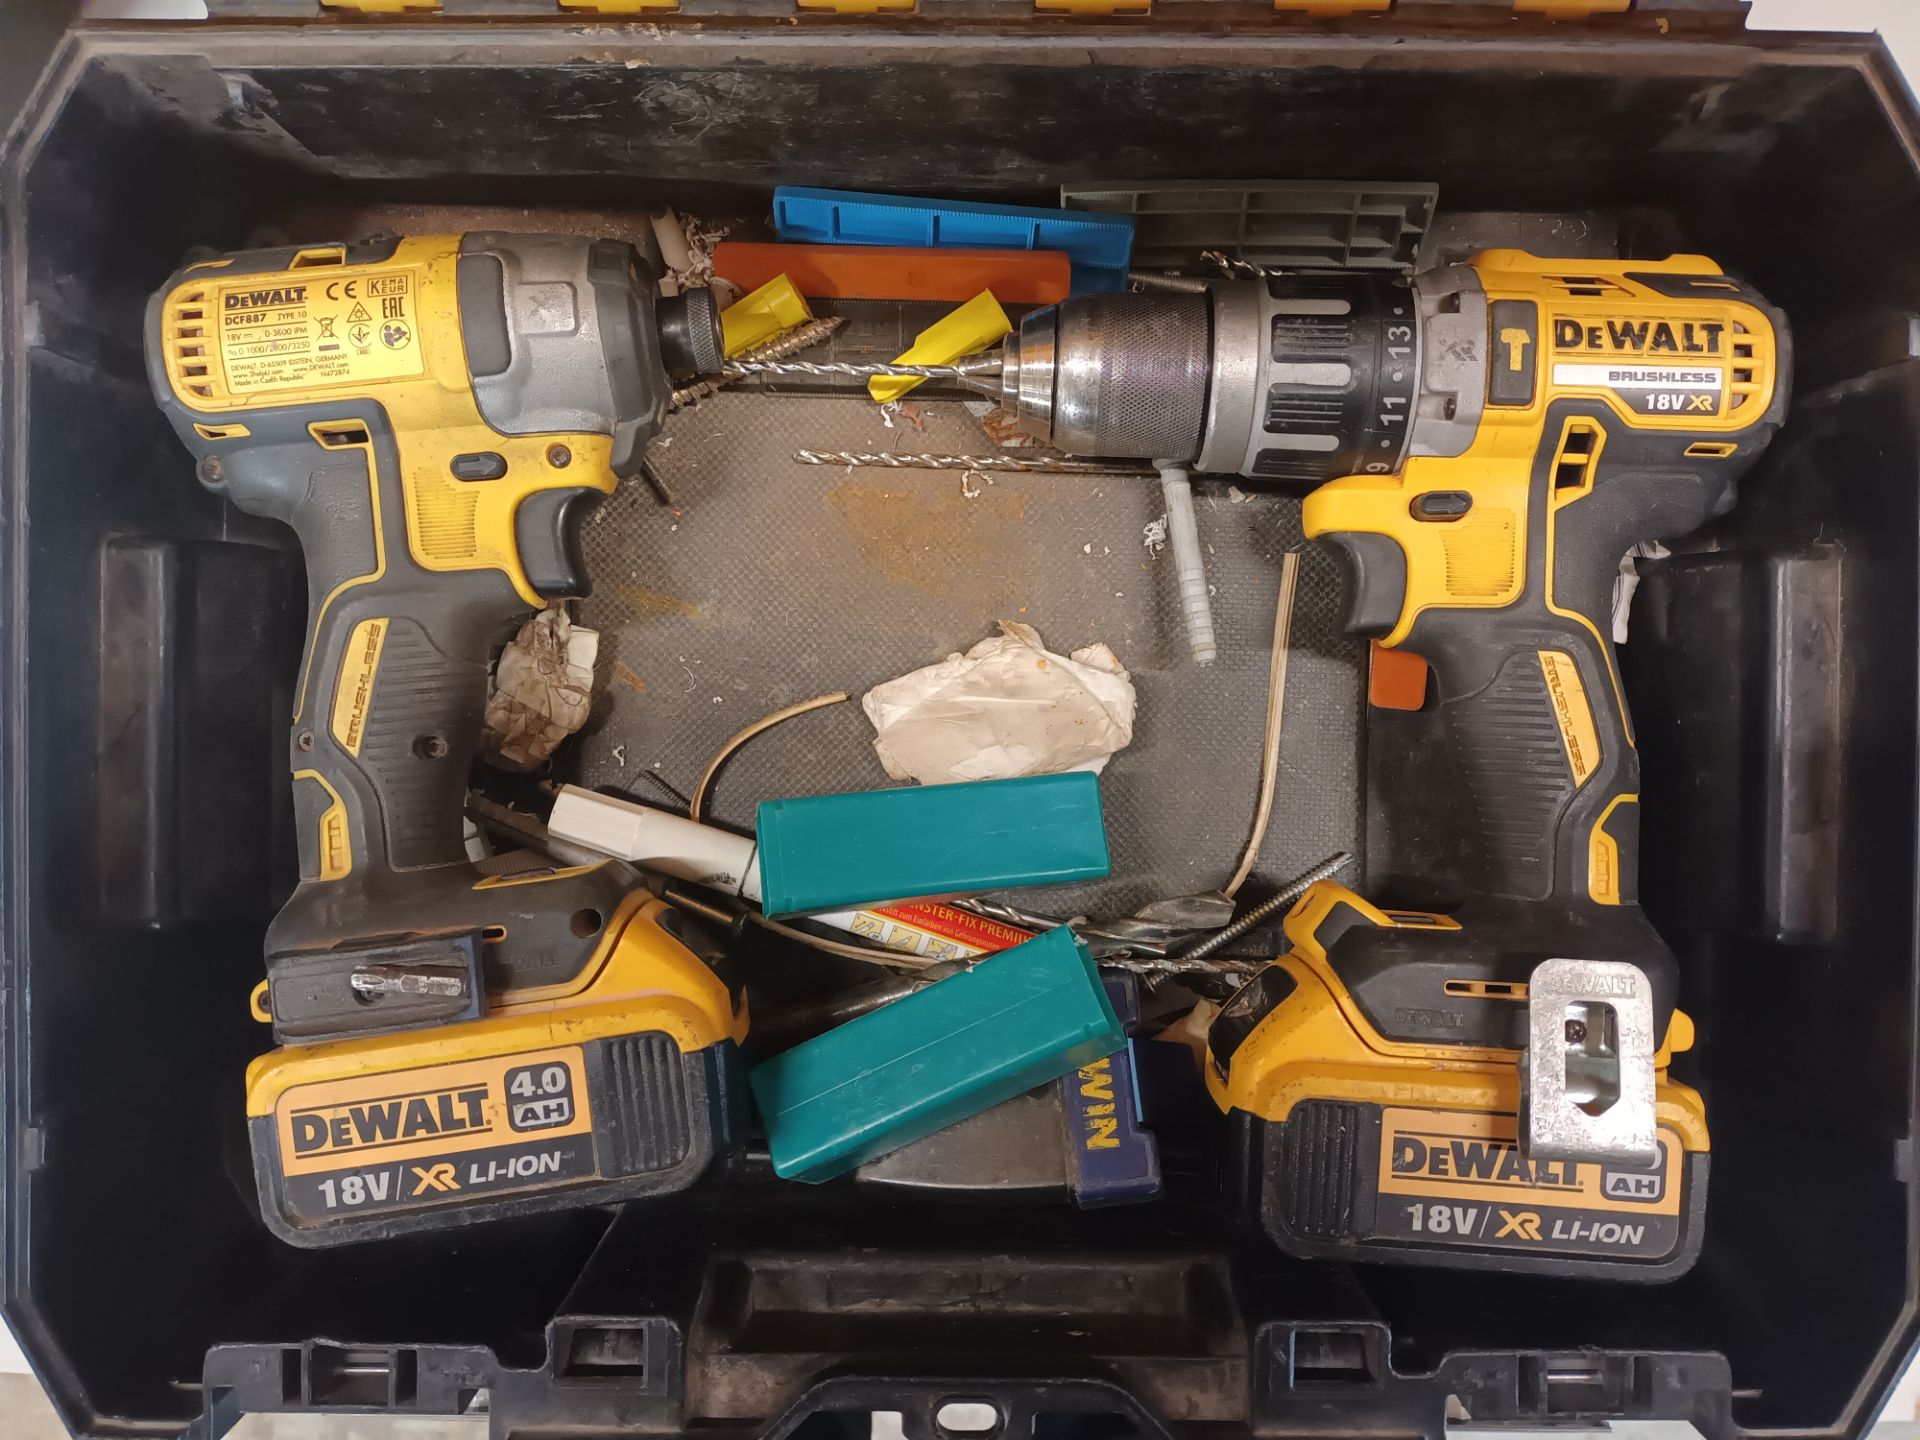 DeWalt DCF887 cordless brushless impact driver with battery and DeWalt DCD796 brushless hammer drill - Image 2 of 3